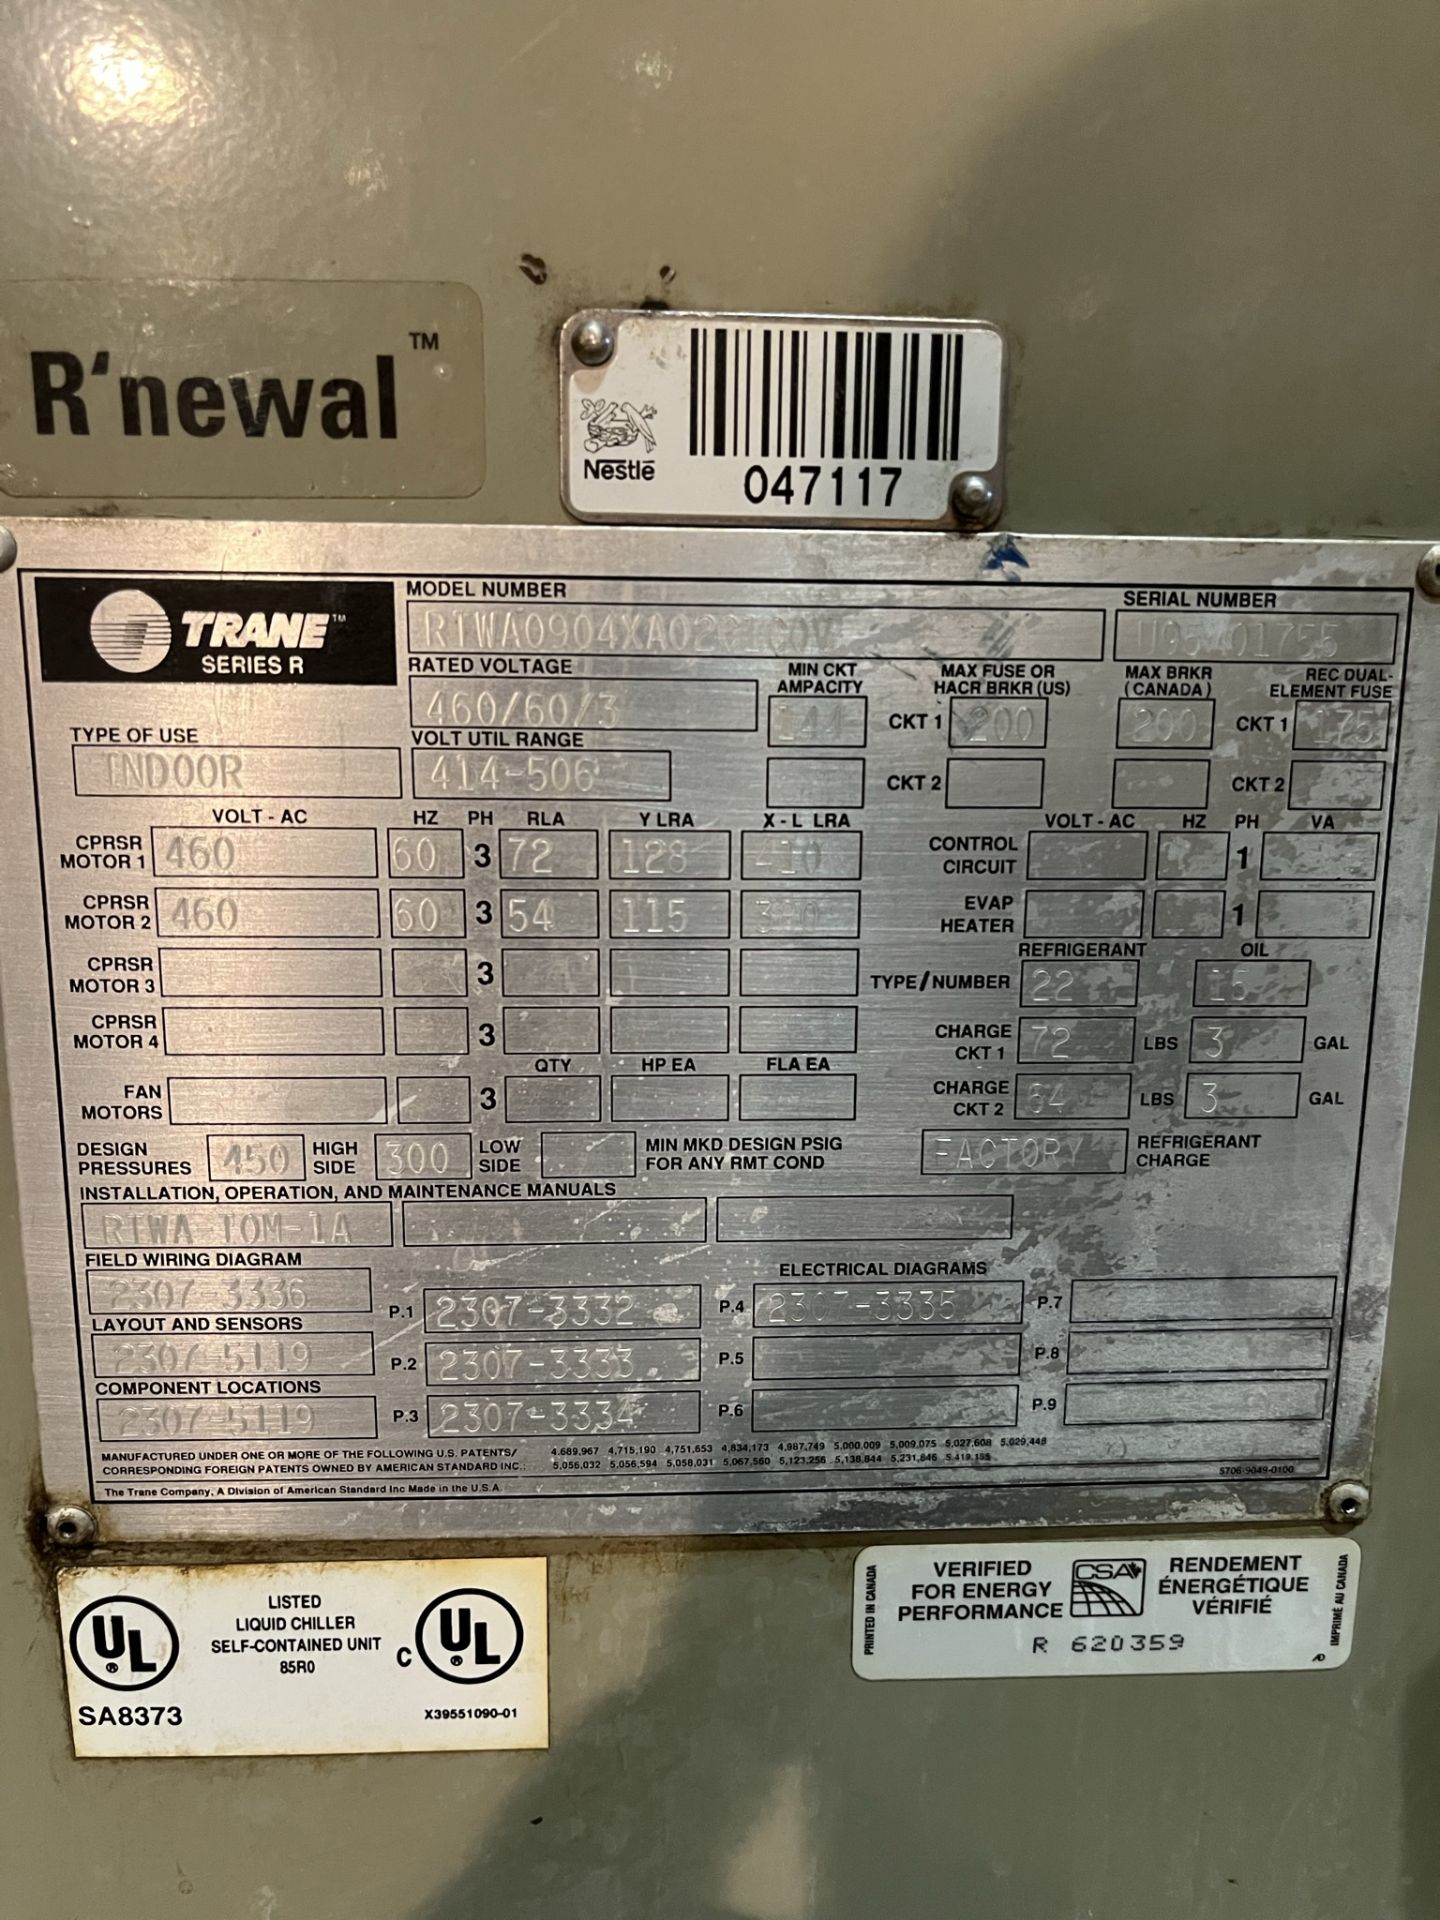 TRAINE SERIES R LIQUID ROTARY WATER CHILLER MODEL NO:RTWA0904XA02C1C0V RATED VOLTAGE 460/60/3 SERIAL - Image 3 of 10